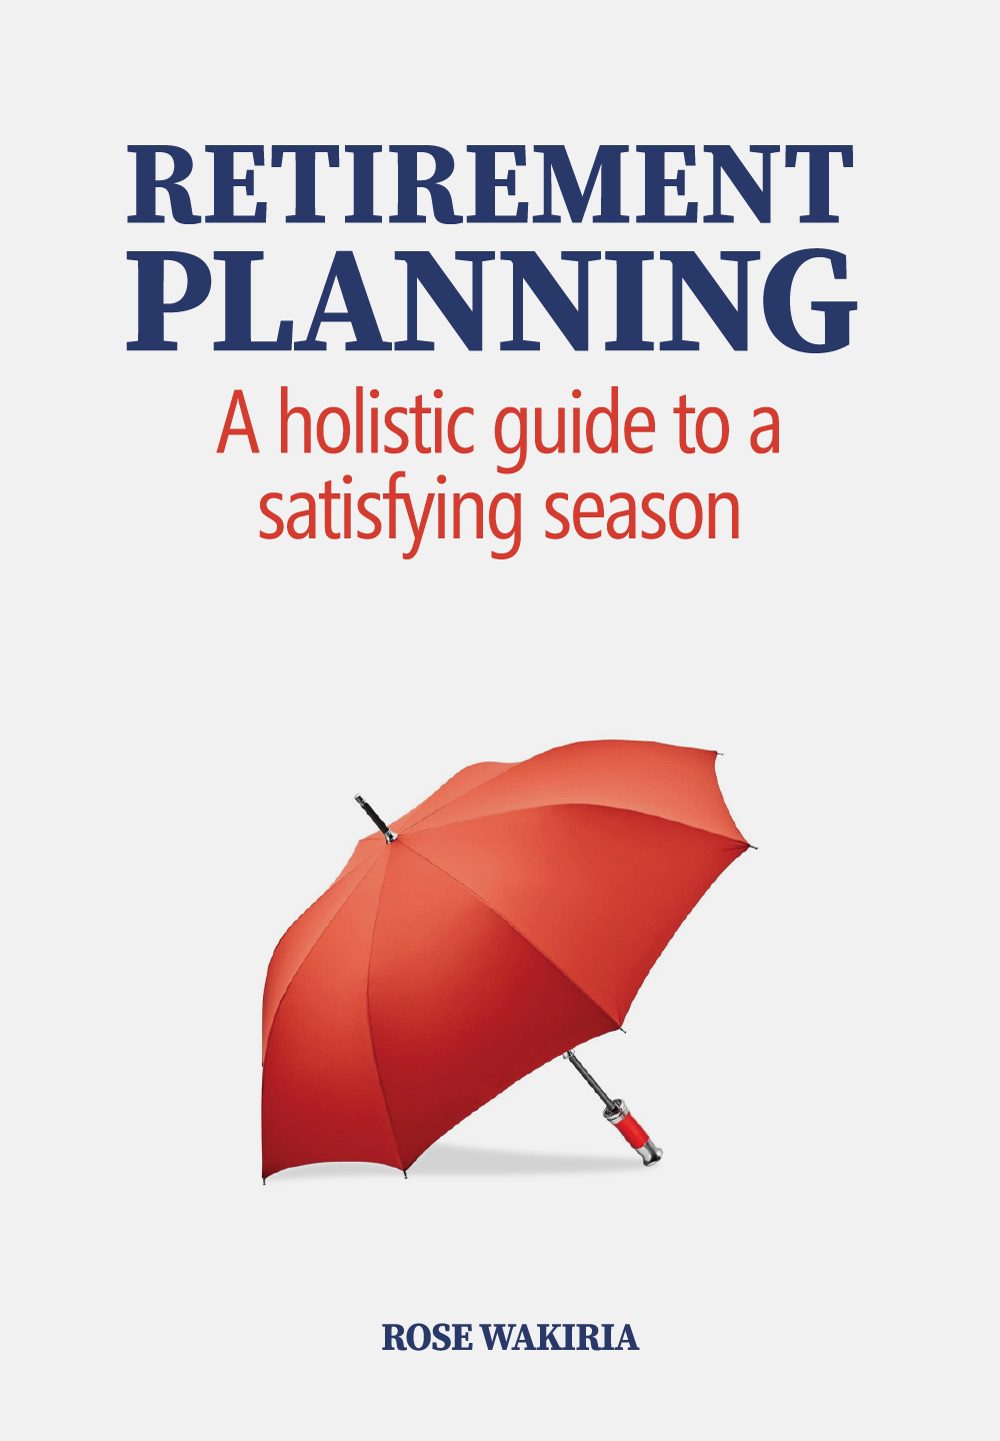 A holistic guide to a satisfying season